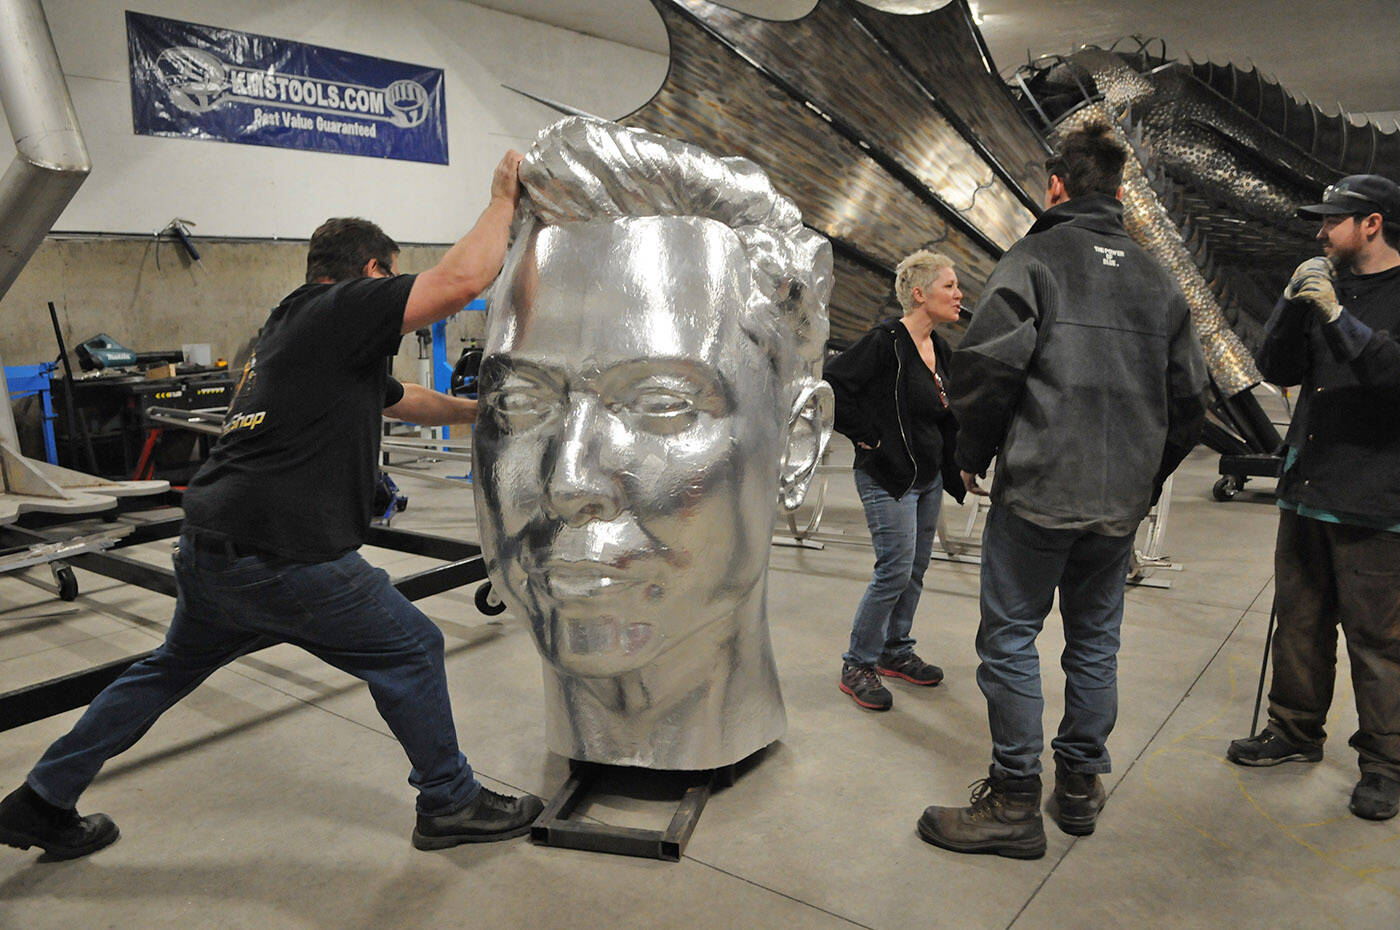 Chilliwack sculptor Kevin Stone (left) moves a gigantic Elon Musk head in his workshop on Tuesday, Jan. 18, 2022. (Jenna Hauck/ Chilliwack Progress)